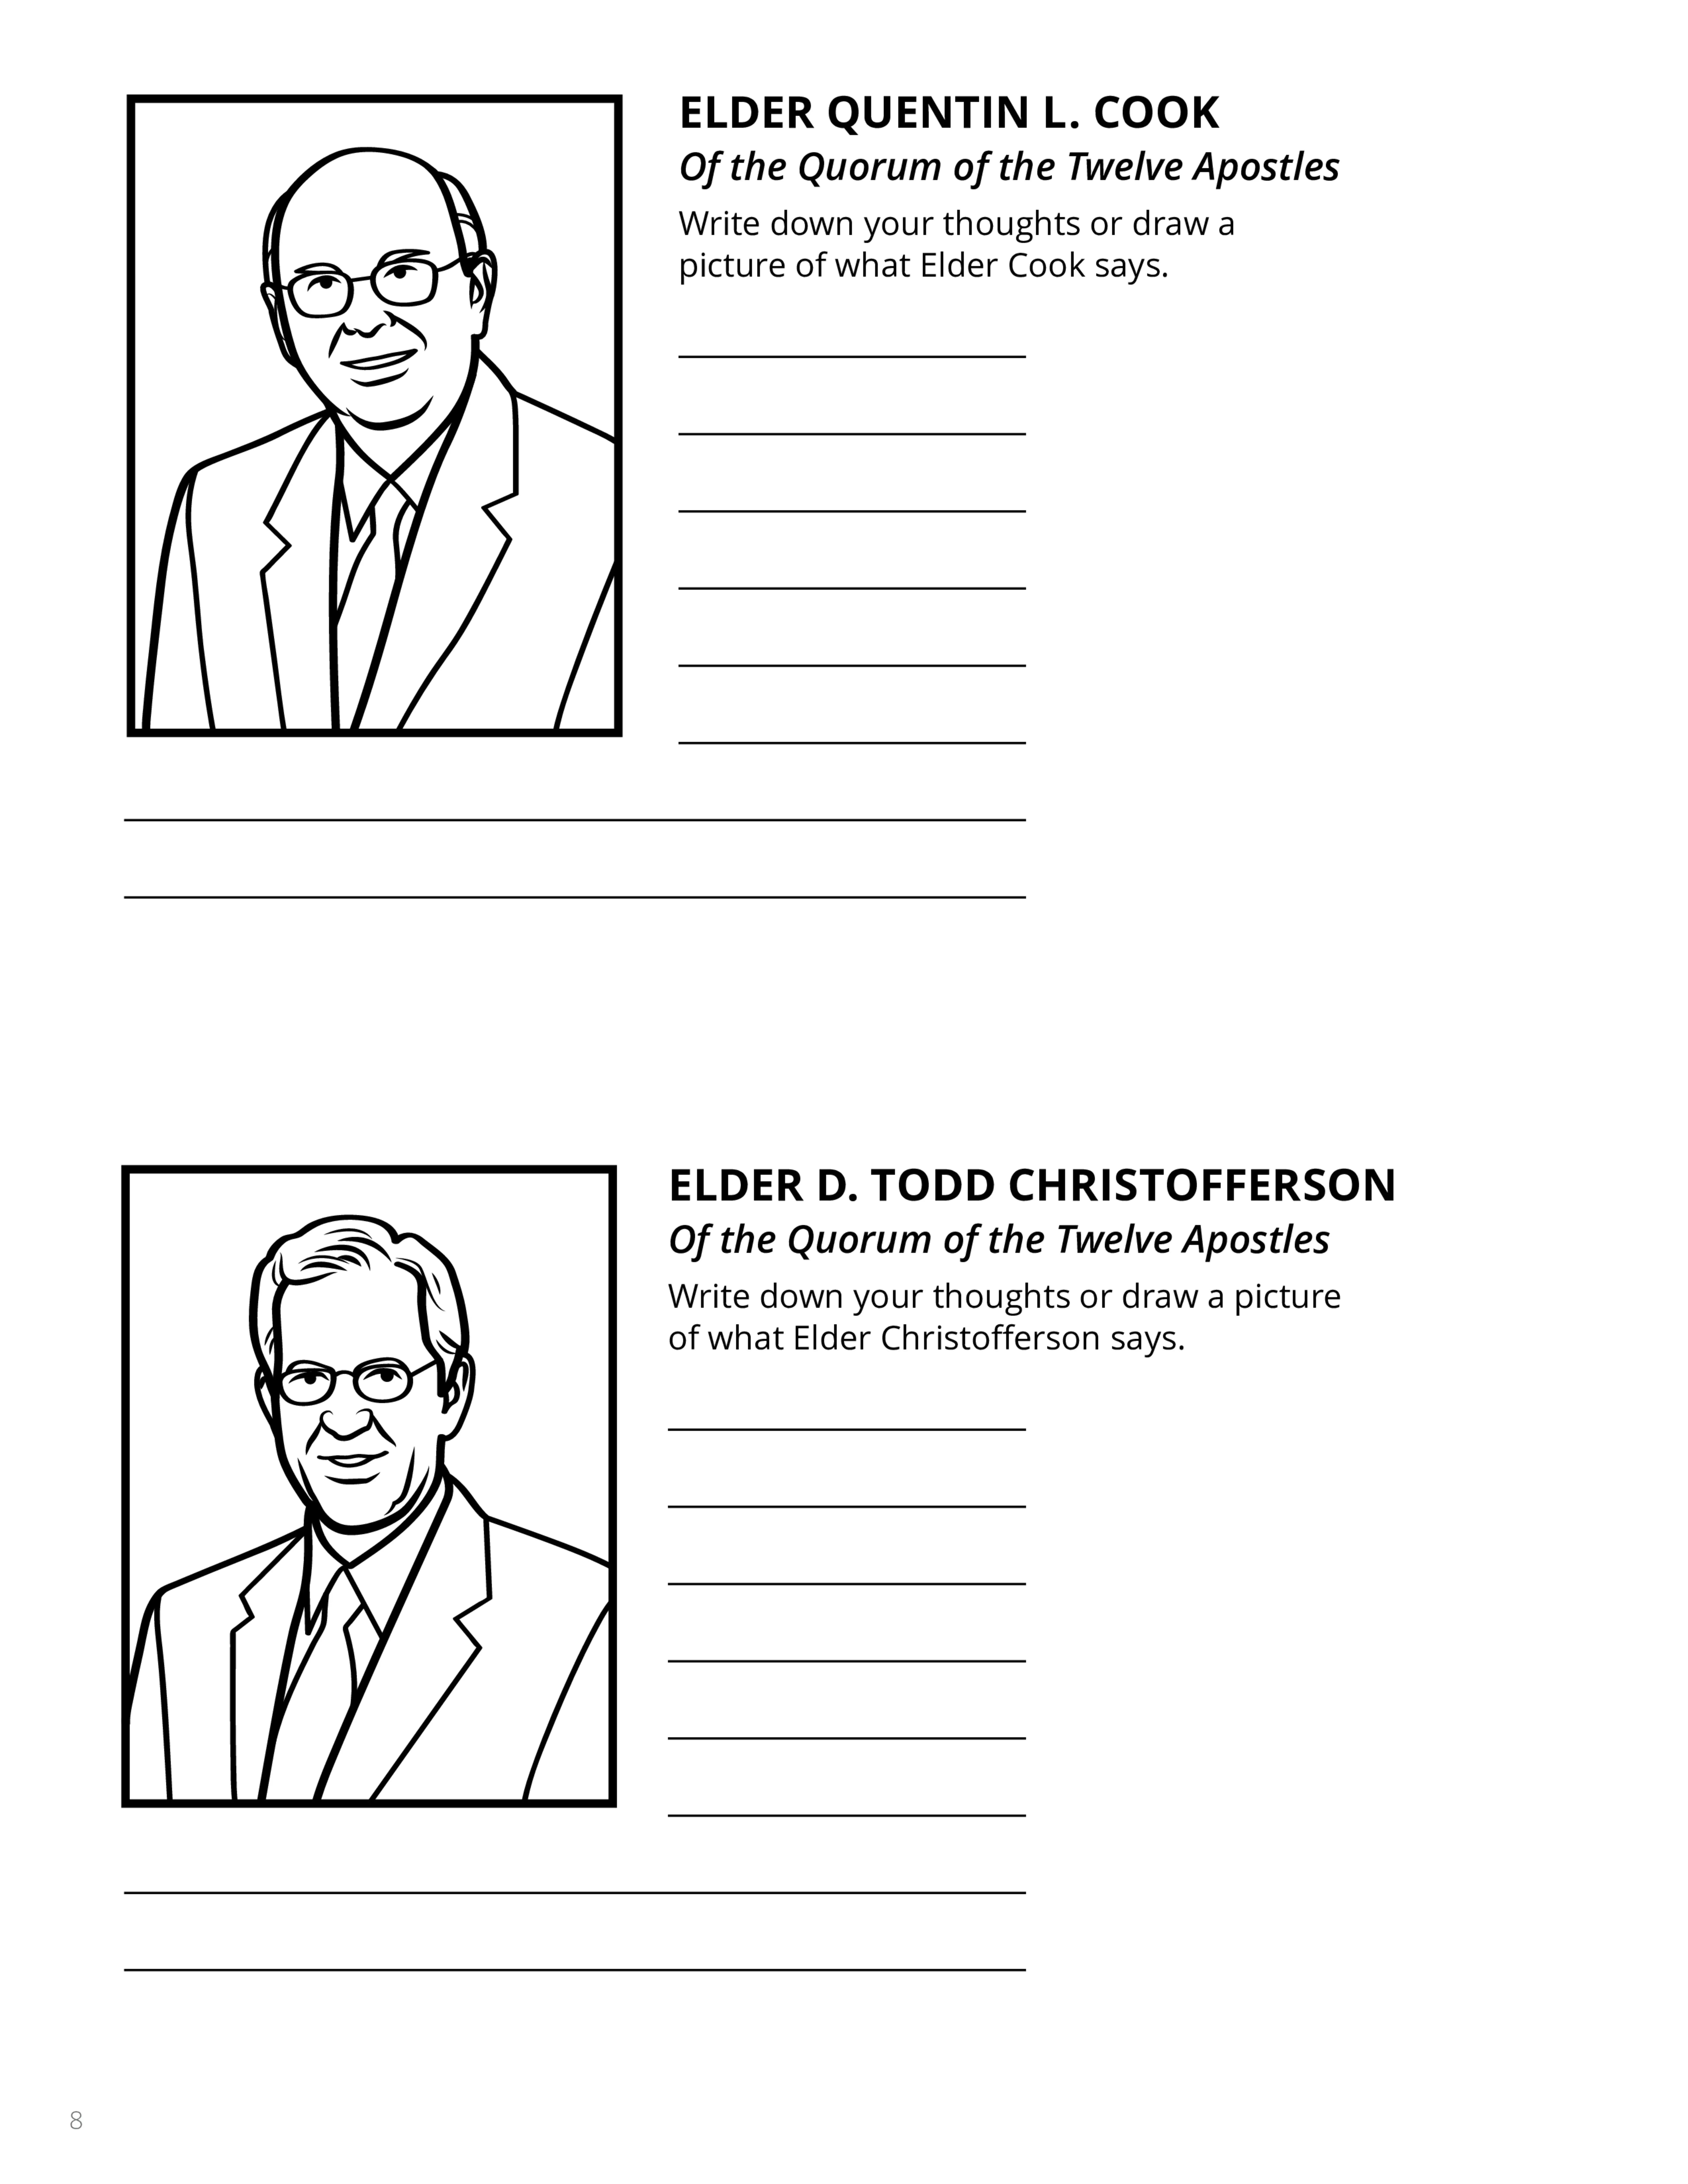 An activity page to encourage children to listen and write down thoughts or draw a picture of what Quentin L. Cook and D. Todd Chrstipherson say.